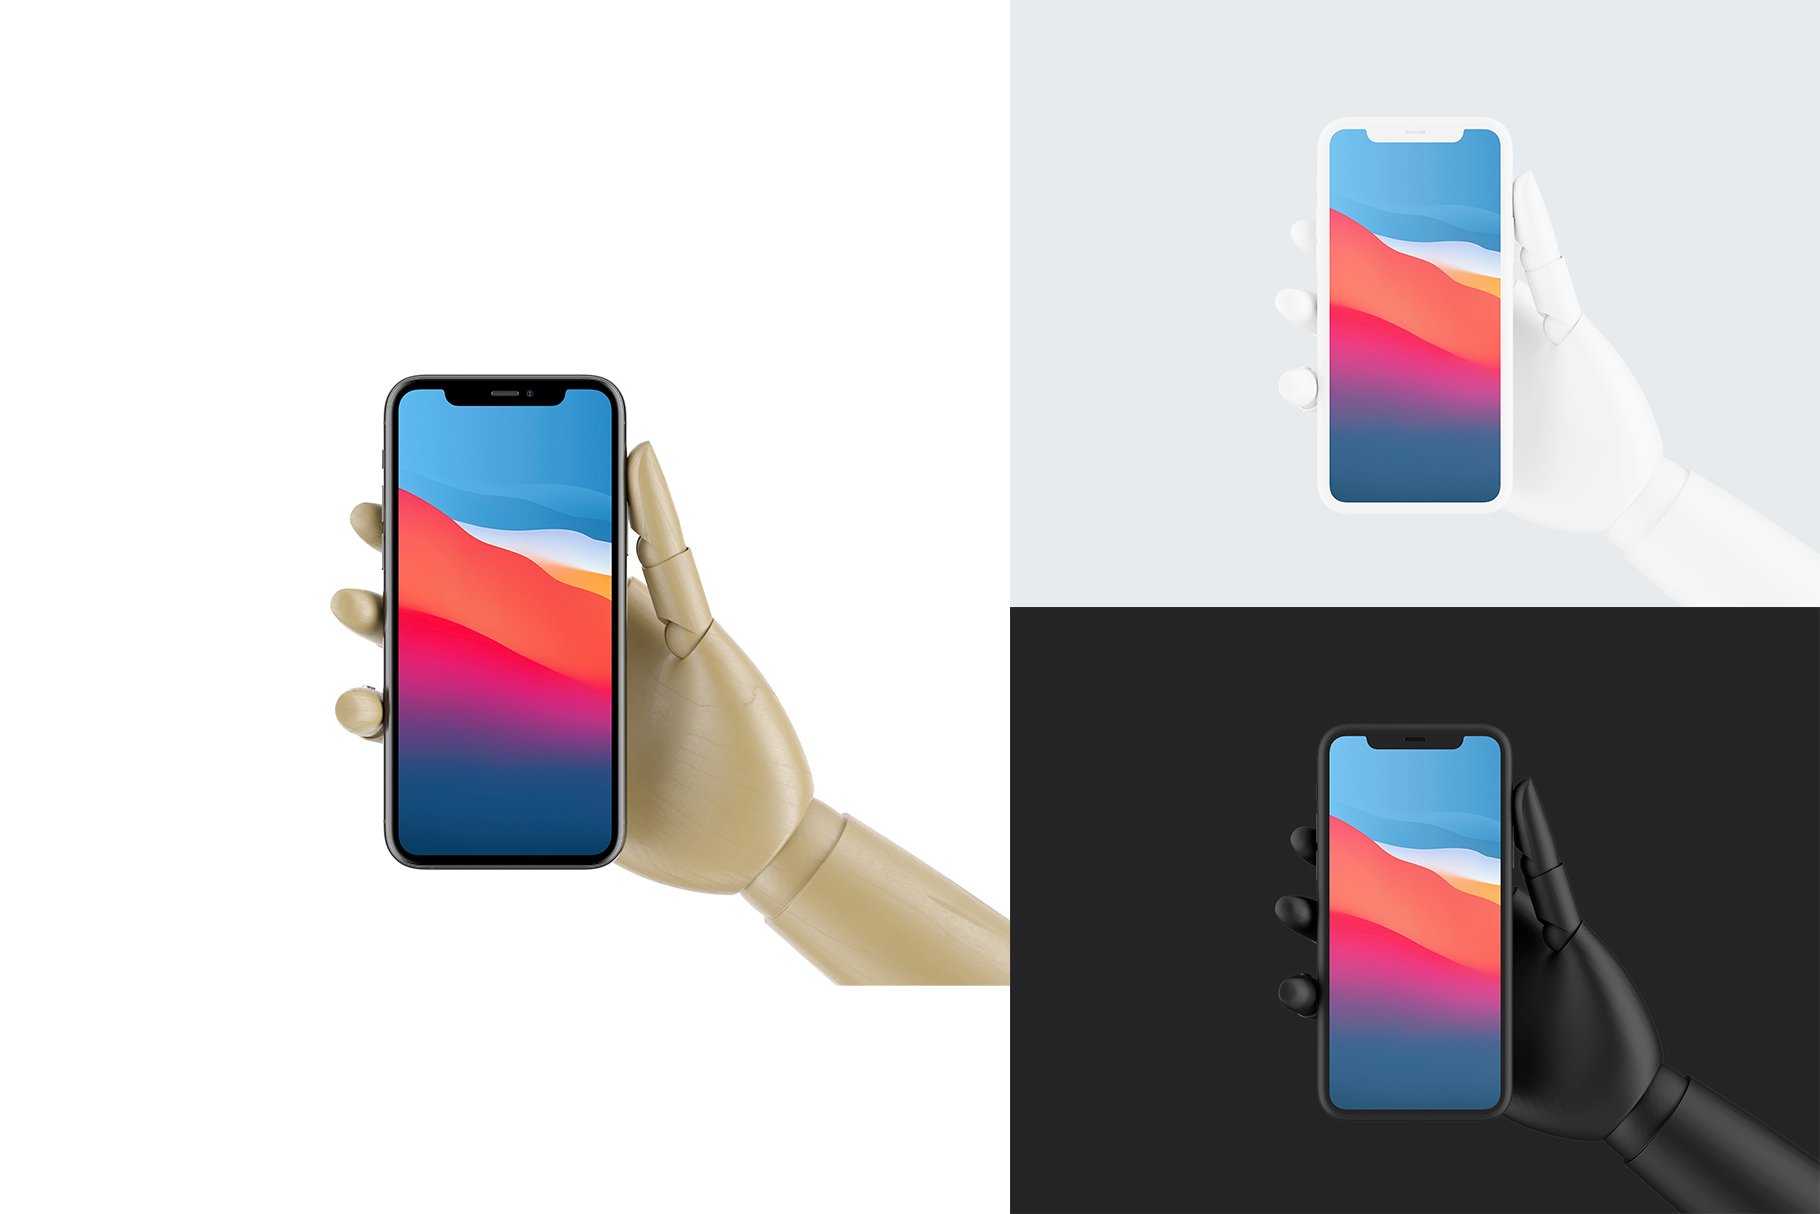 iphone 11 pro mockup pack by anthony boyd graphics 28s6v229 939